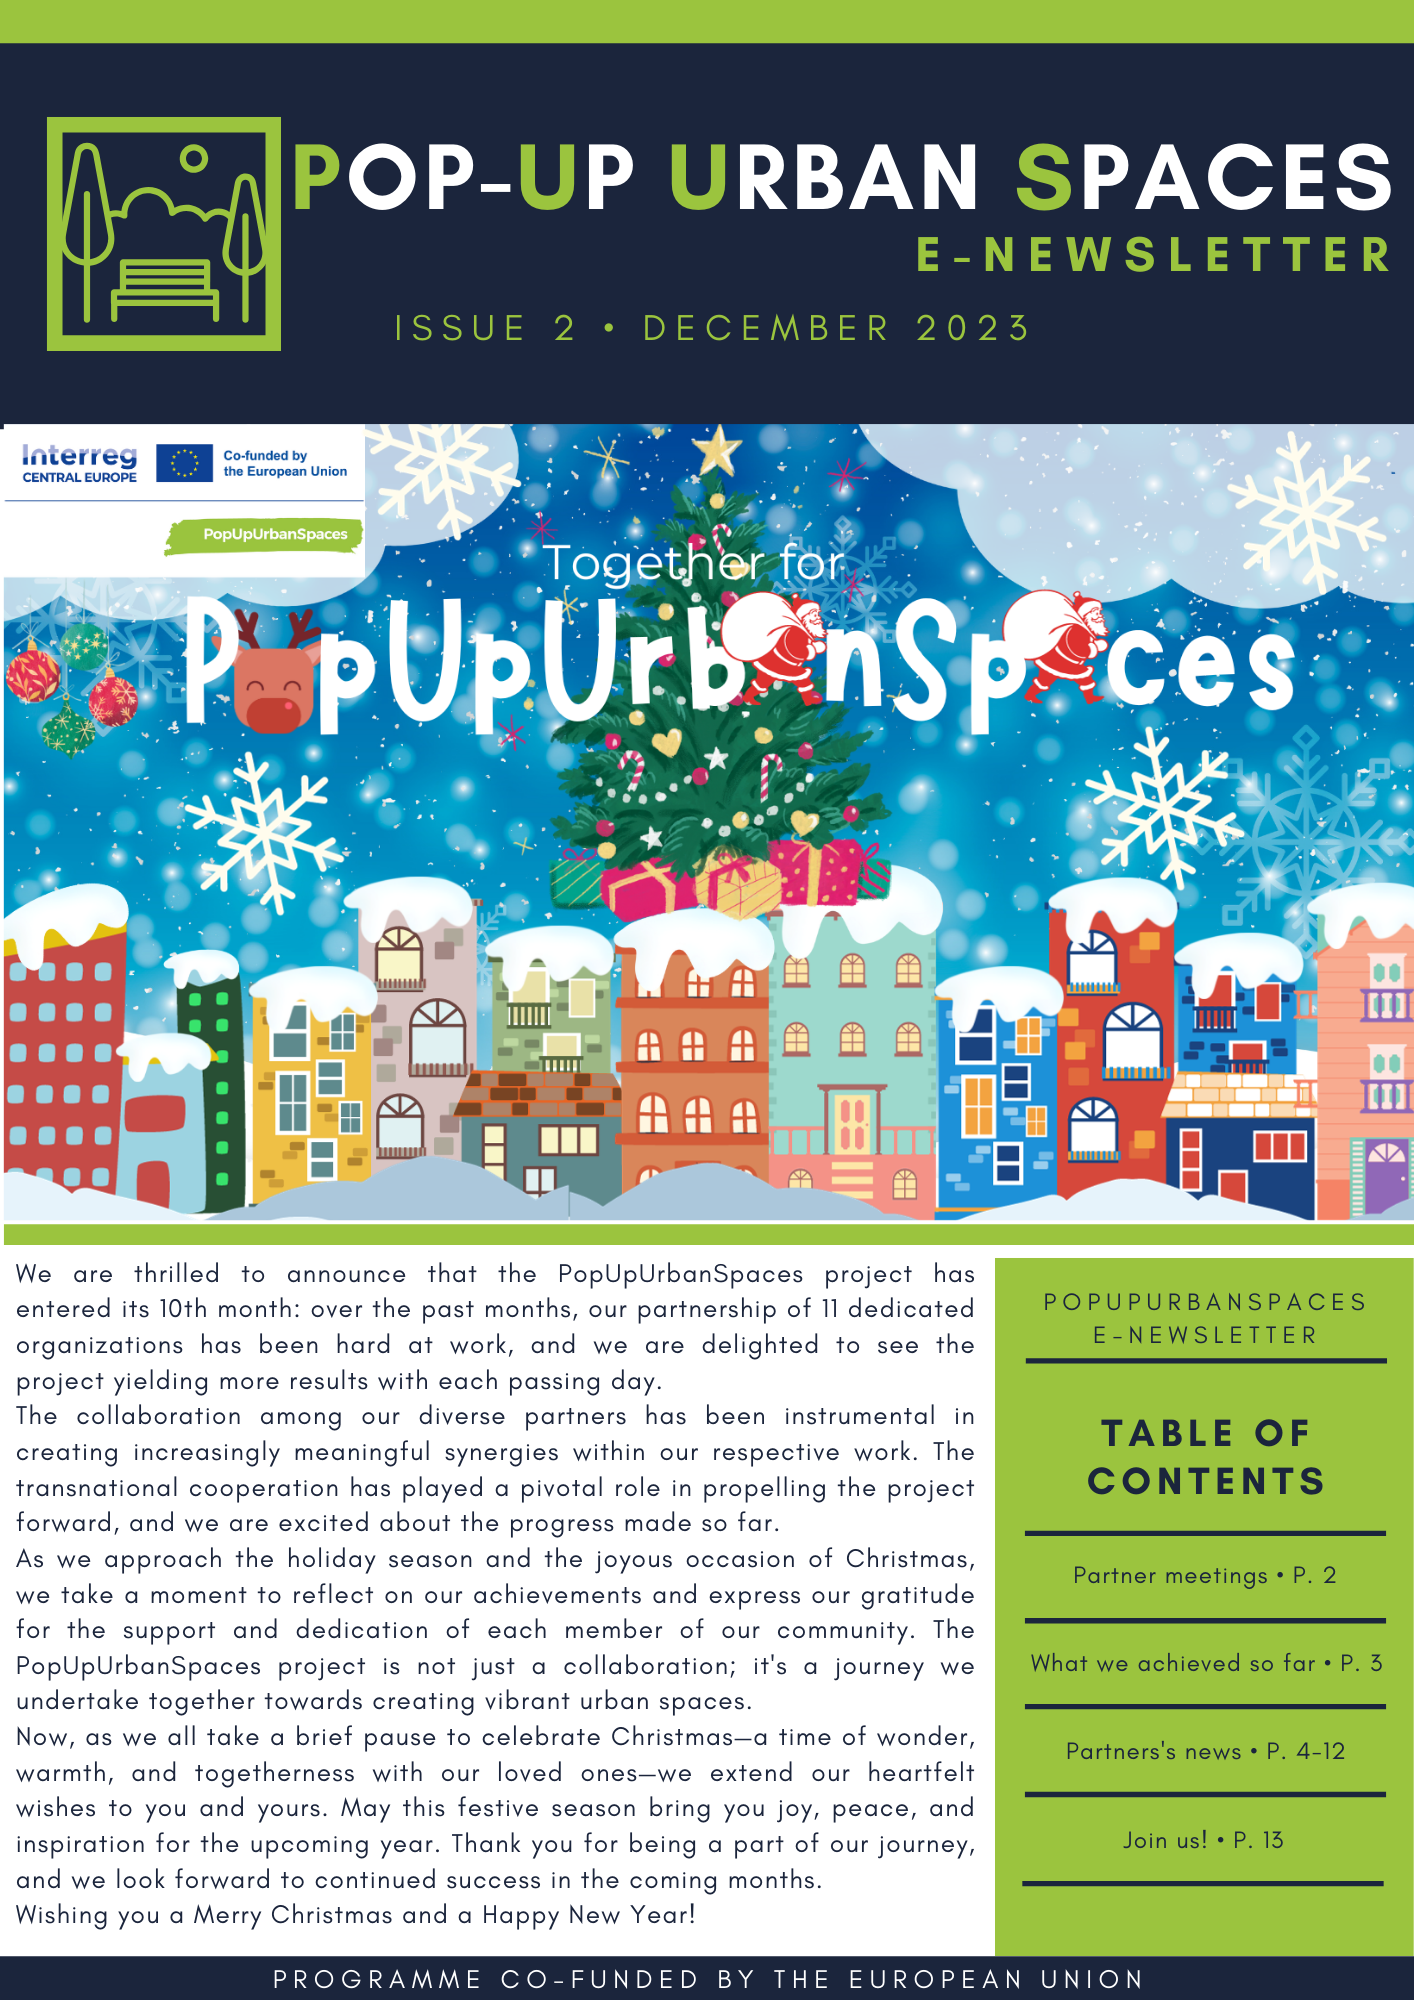 PopUpUrbanSpaces eNewsletter Issue1 is available